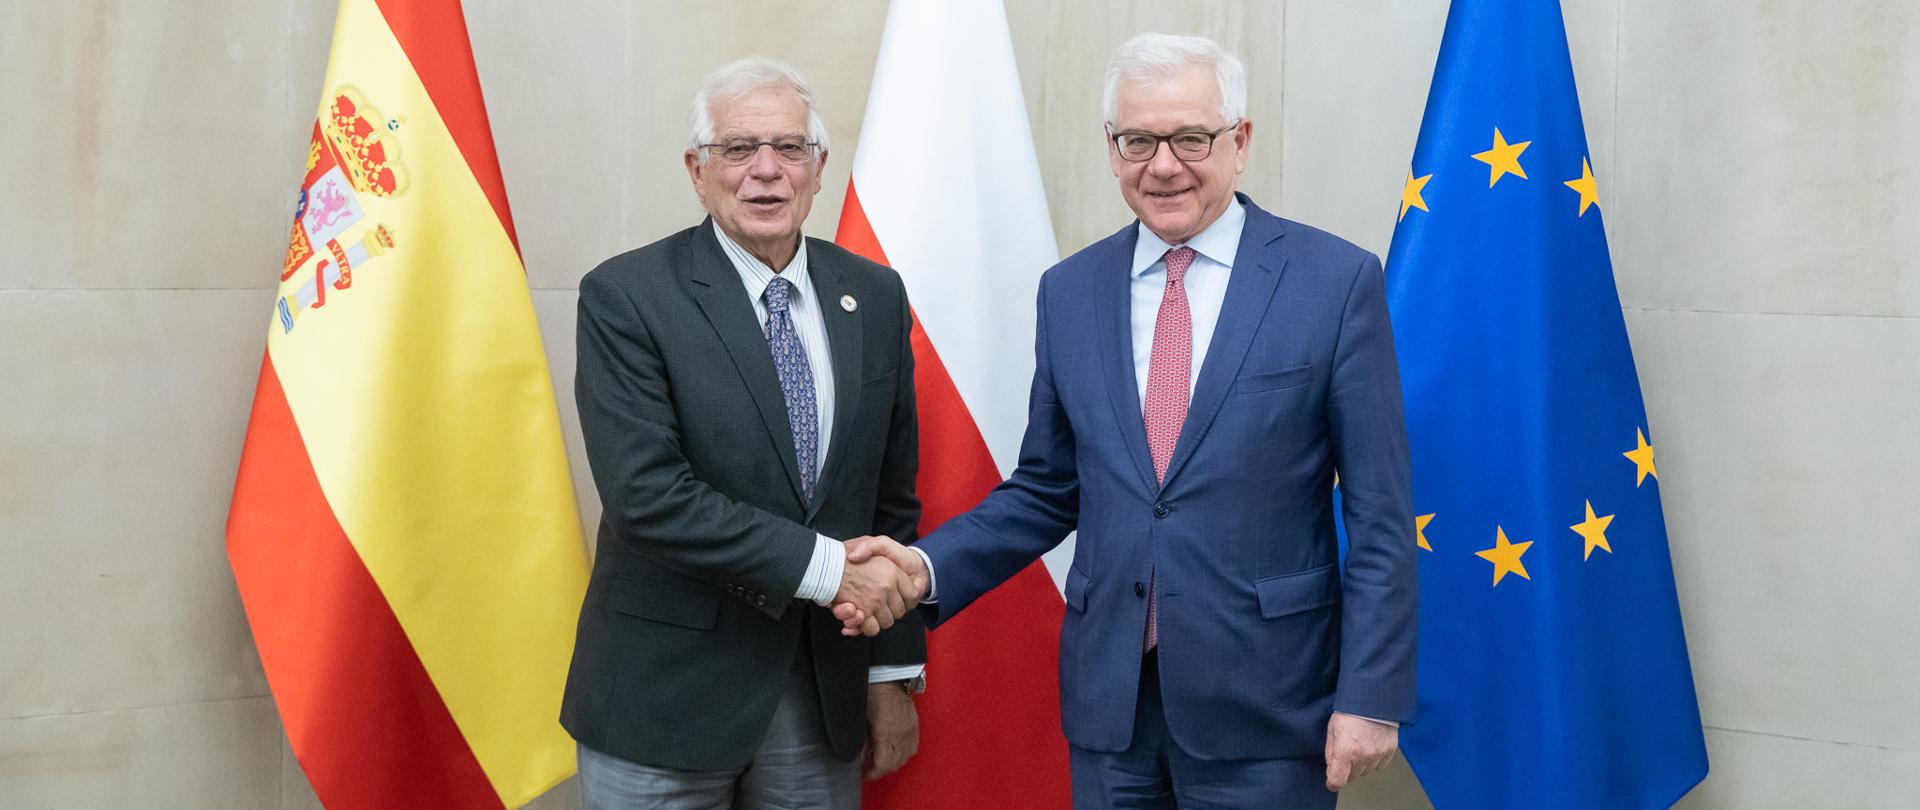 Foreign ministers of Poland and Spain meet